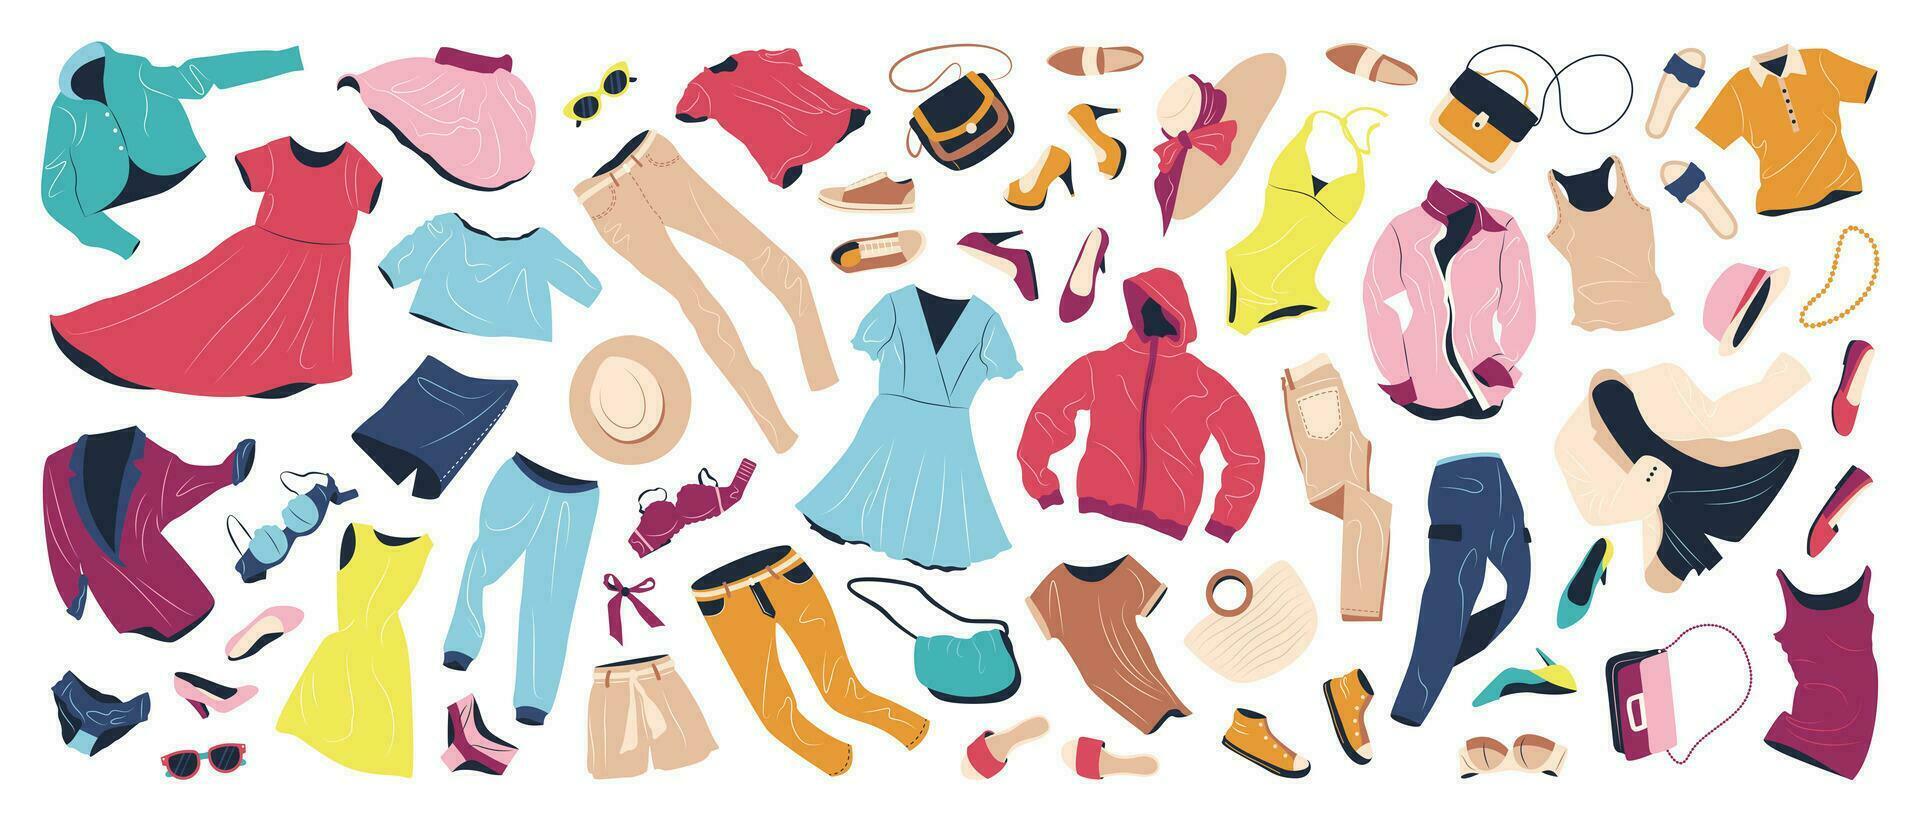 Set of fashion clothes for women. Casual garments and accessories for spring and summer. Jacket, bags, shoes, trousers, dress, hats flying. Flat vector illustrations isolated on white background.